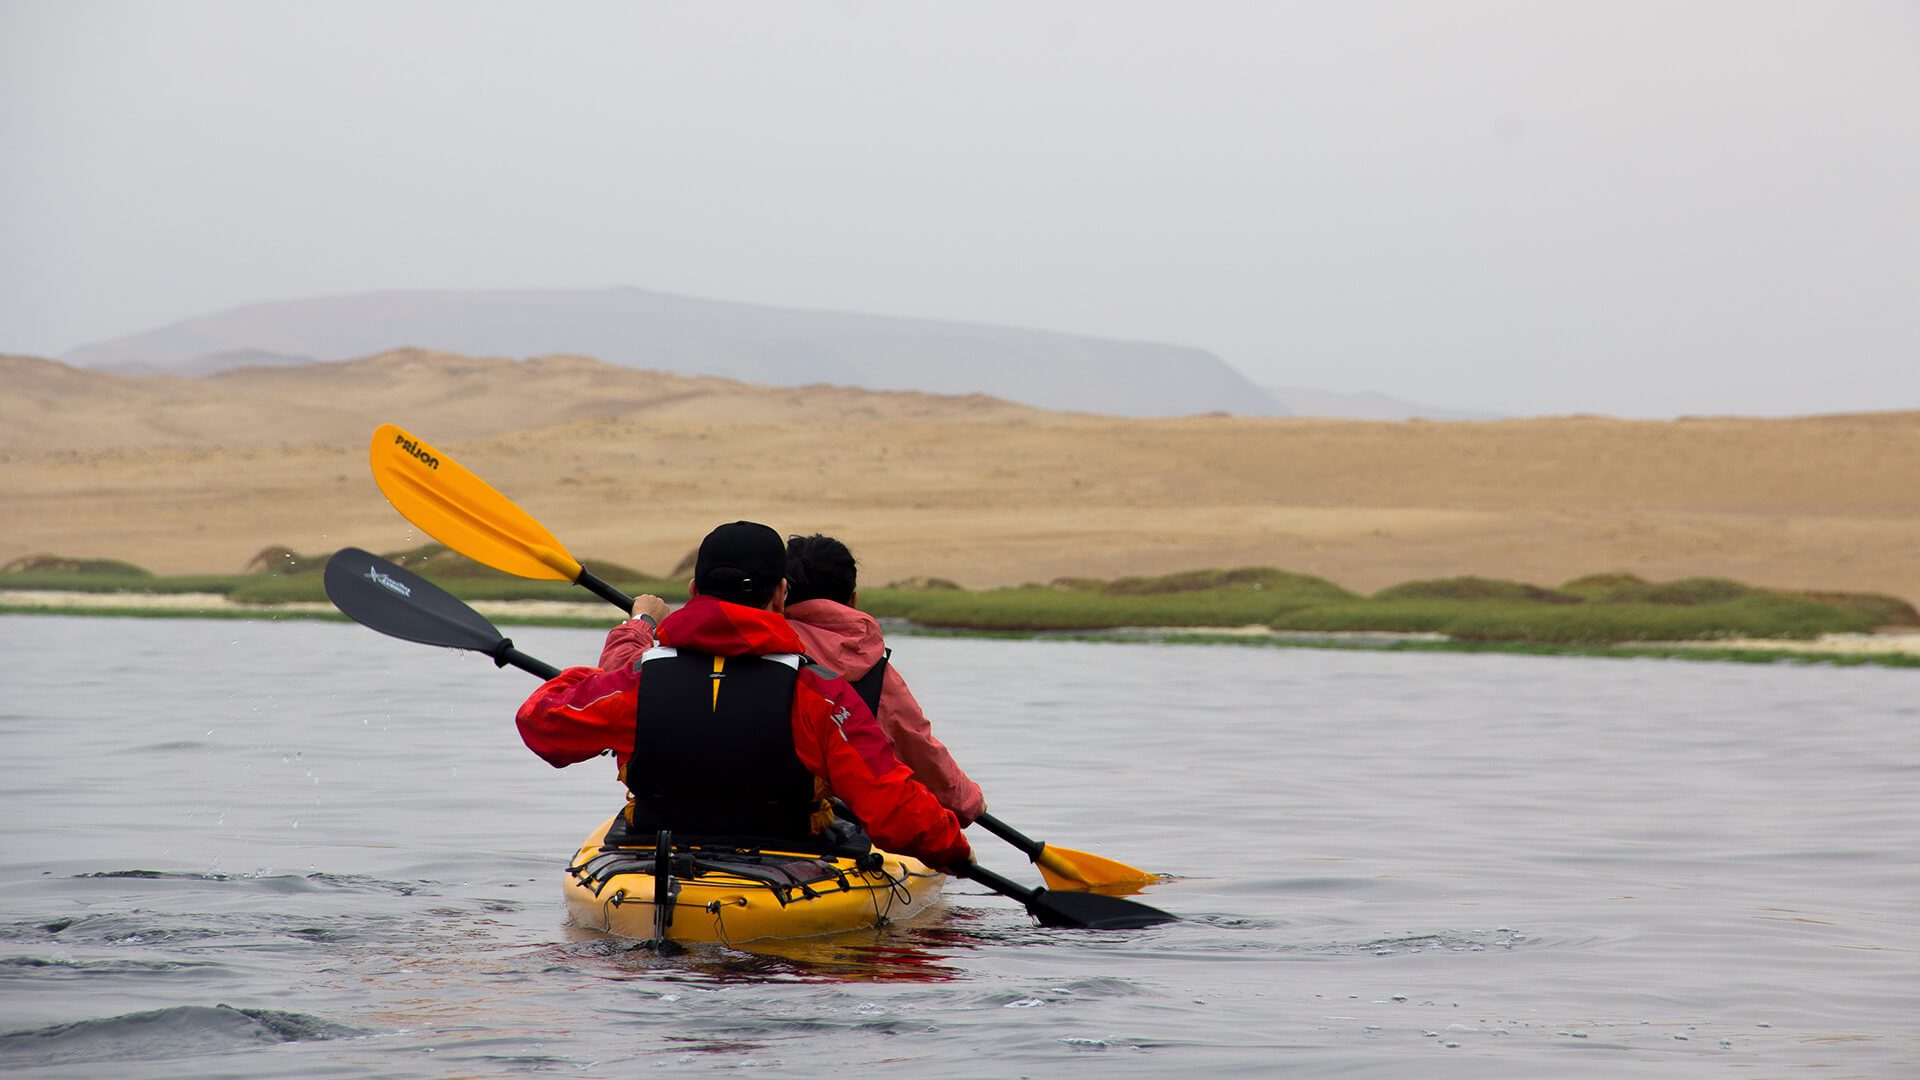 Tandem kayak paddling towards the shore with two horizons in the background - RESPONSible Travel Peru